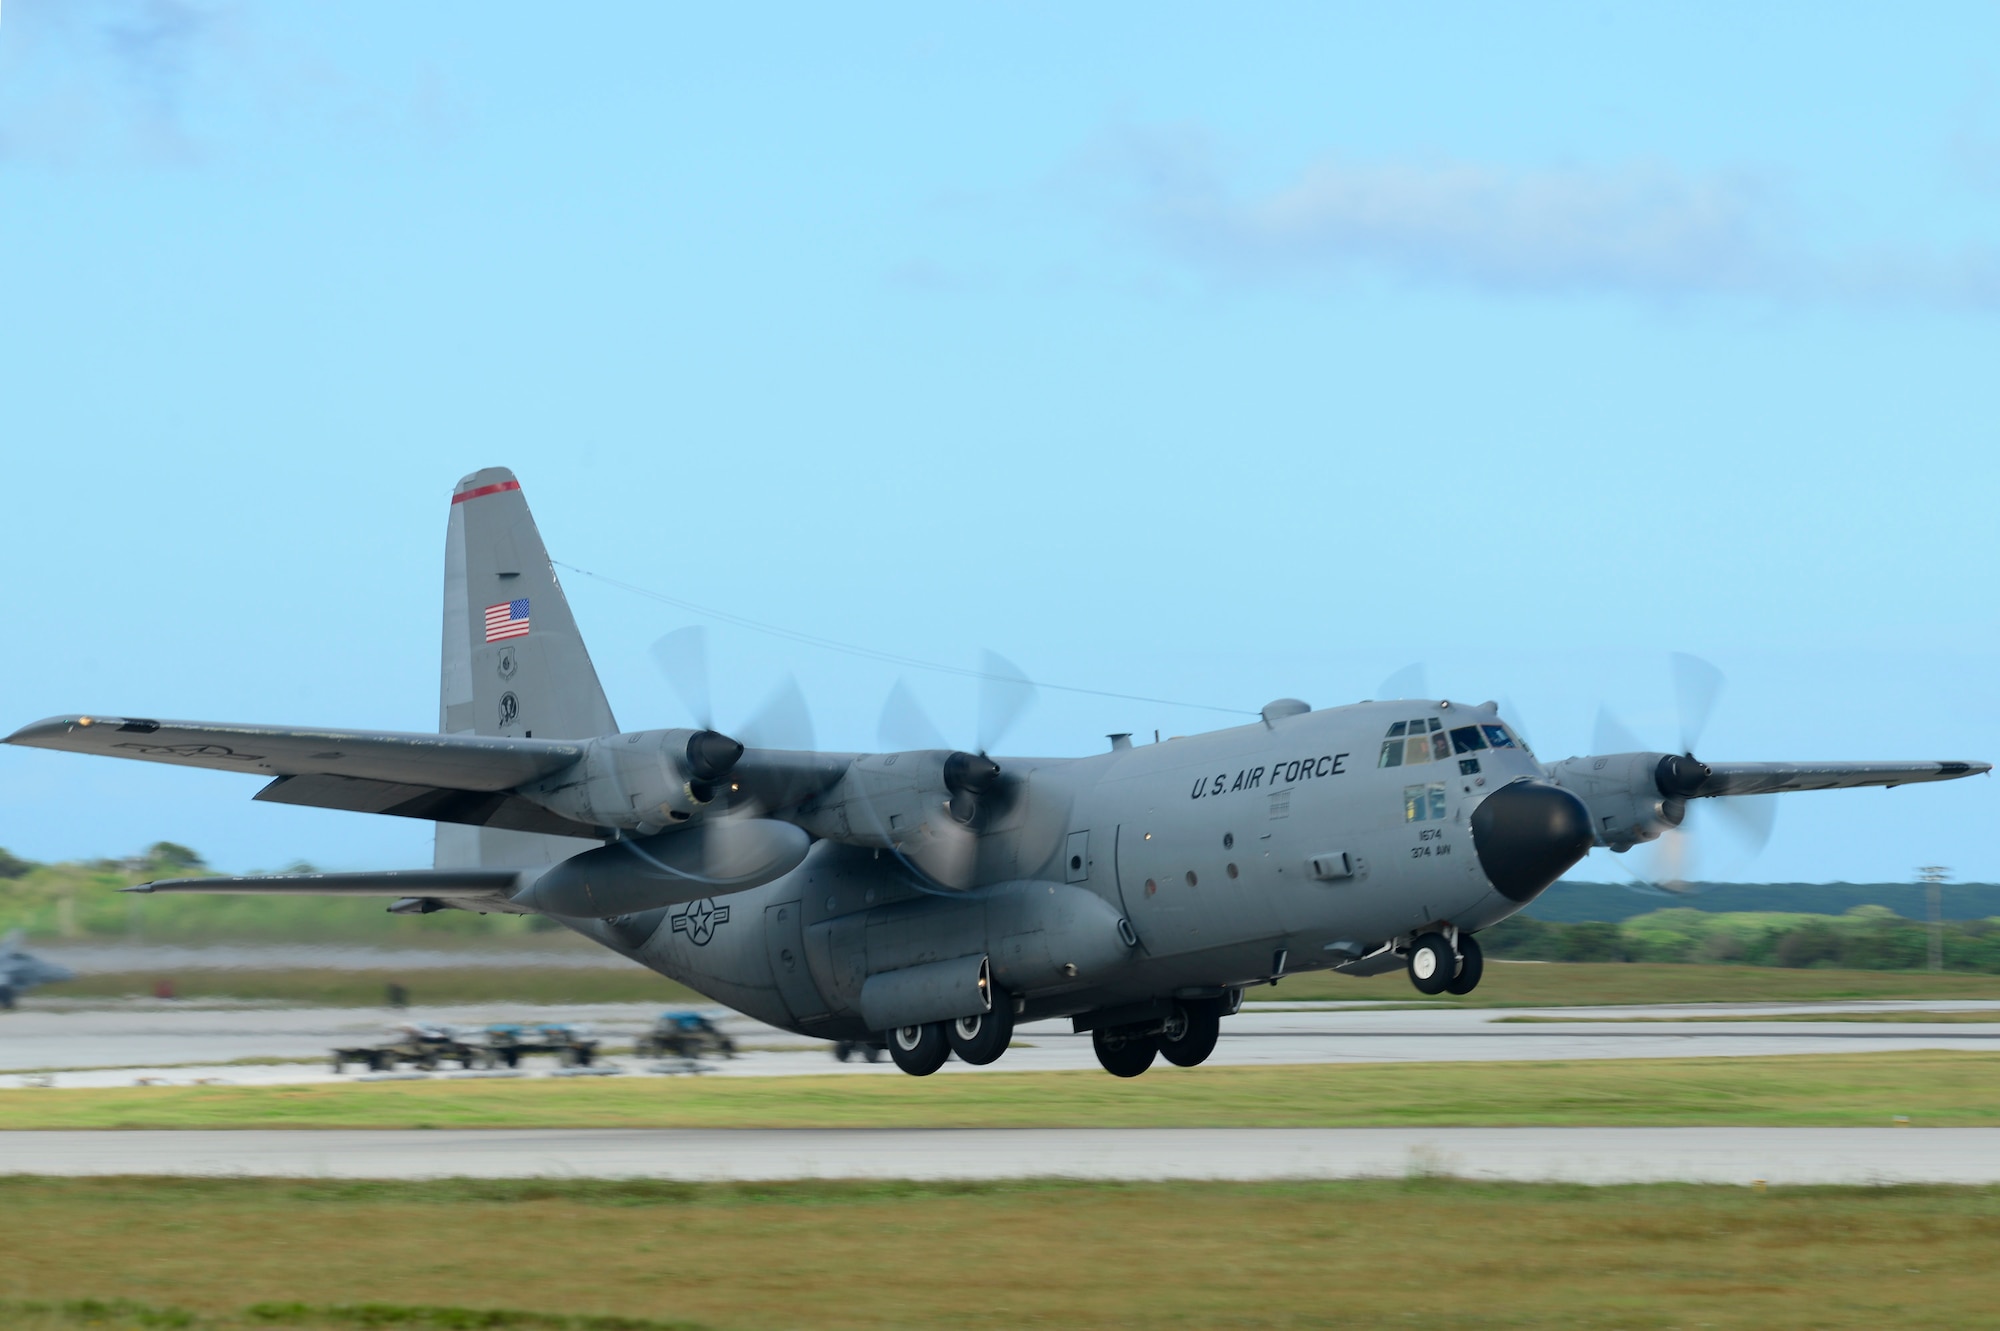 A C-130 Hercules aircraft from the 374th Airlift Wing, Yokota Air Base, Japan, takes off for an airdrop mission during Operation Christmas Drop at Andersen Air Force Base, Guam, Dec. 11, 2013. This year marks the 62nd year of Operation Christmas Drop, which began in 1952, making it the world's longest running airdrop mission. Every December, C-130 Hercules crews from the 374th Airlift Wing at Yokota Air Base, Japan, partner with the 36th Wing at Andersen Air Force Base, Guam, to airlift food, supplies and toys to islanders throughout Micronesia. (U.S. Air Force photo by 2nd Lt. Jake Bailey/Released)